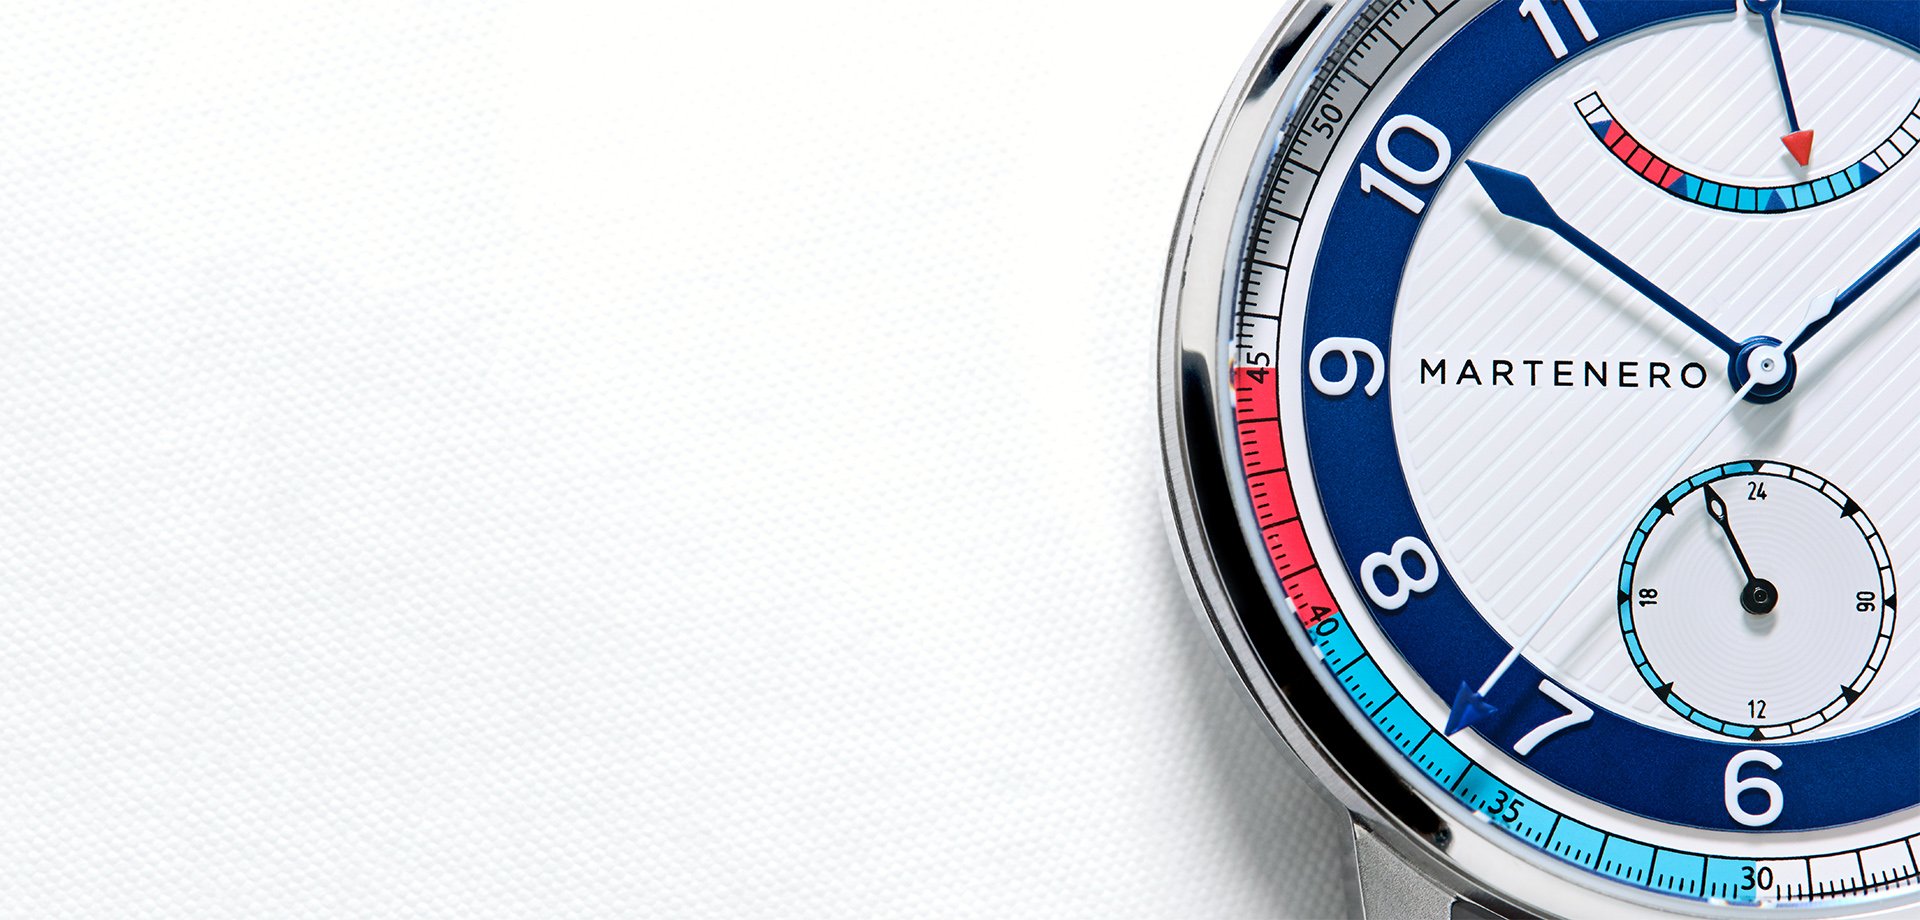 A nautical-themed watch in a variety of bold colorways